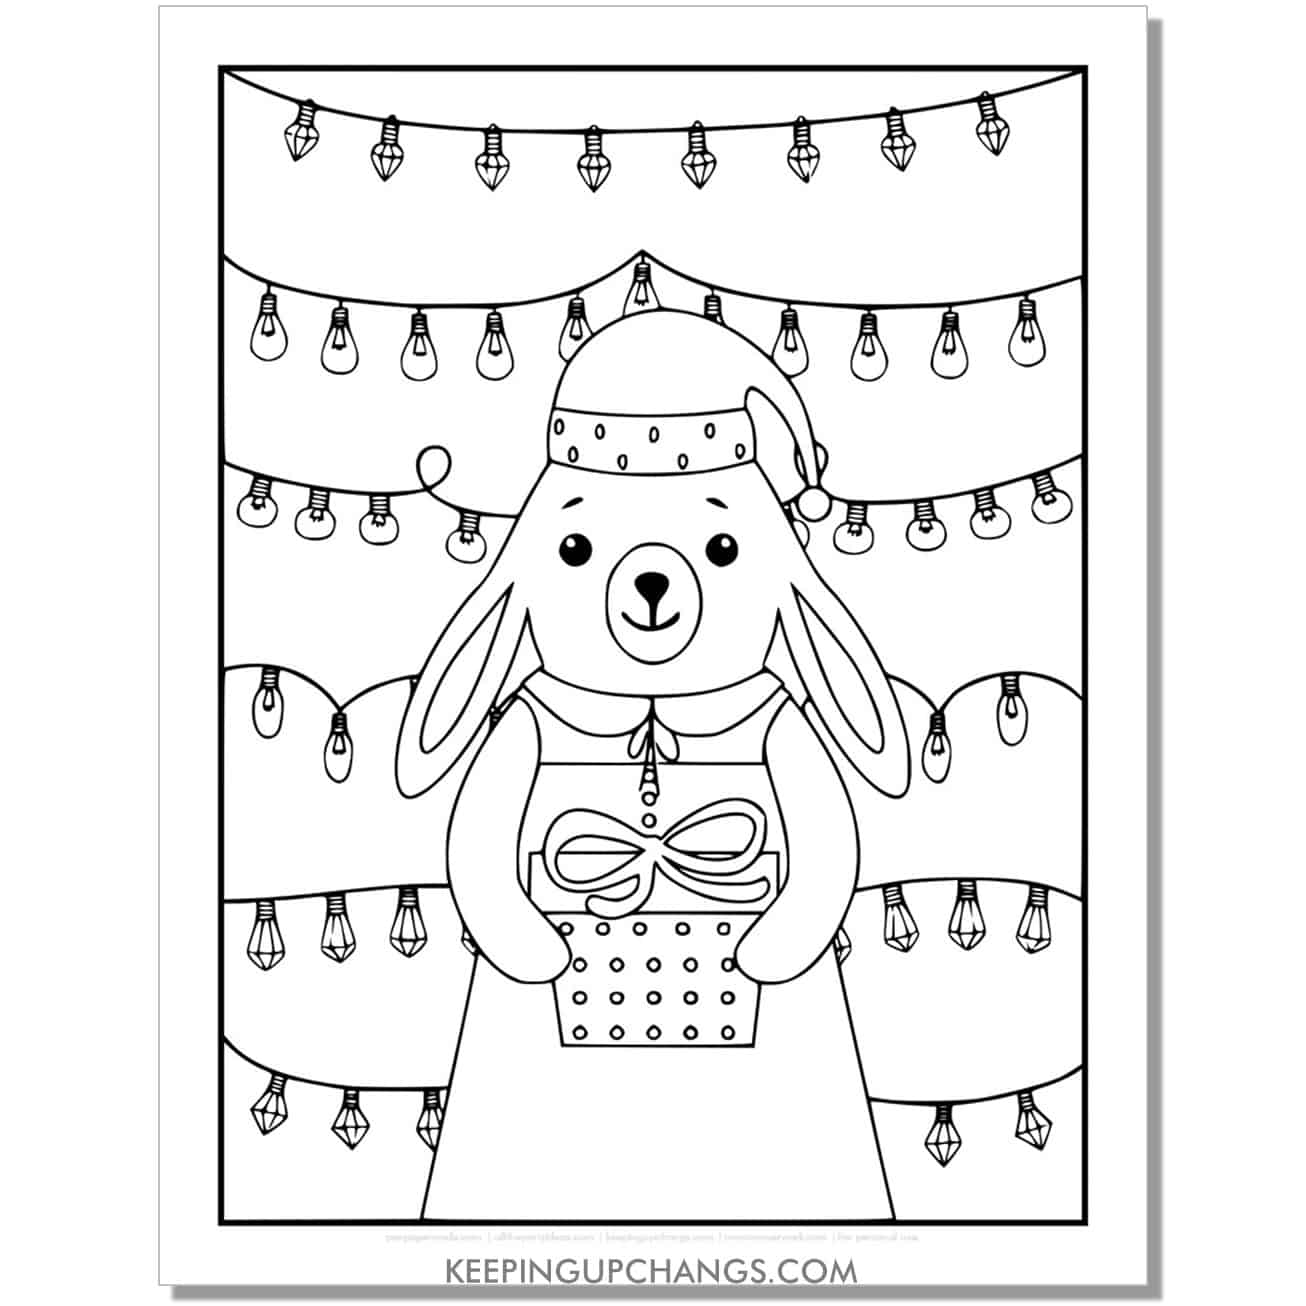 free bunny rabbit and holiday lights full size christmas animal coloring page.